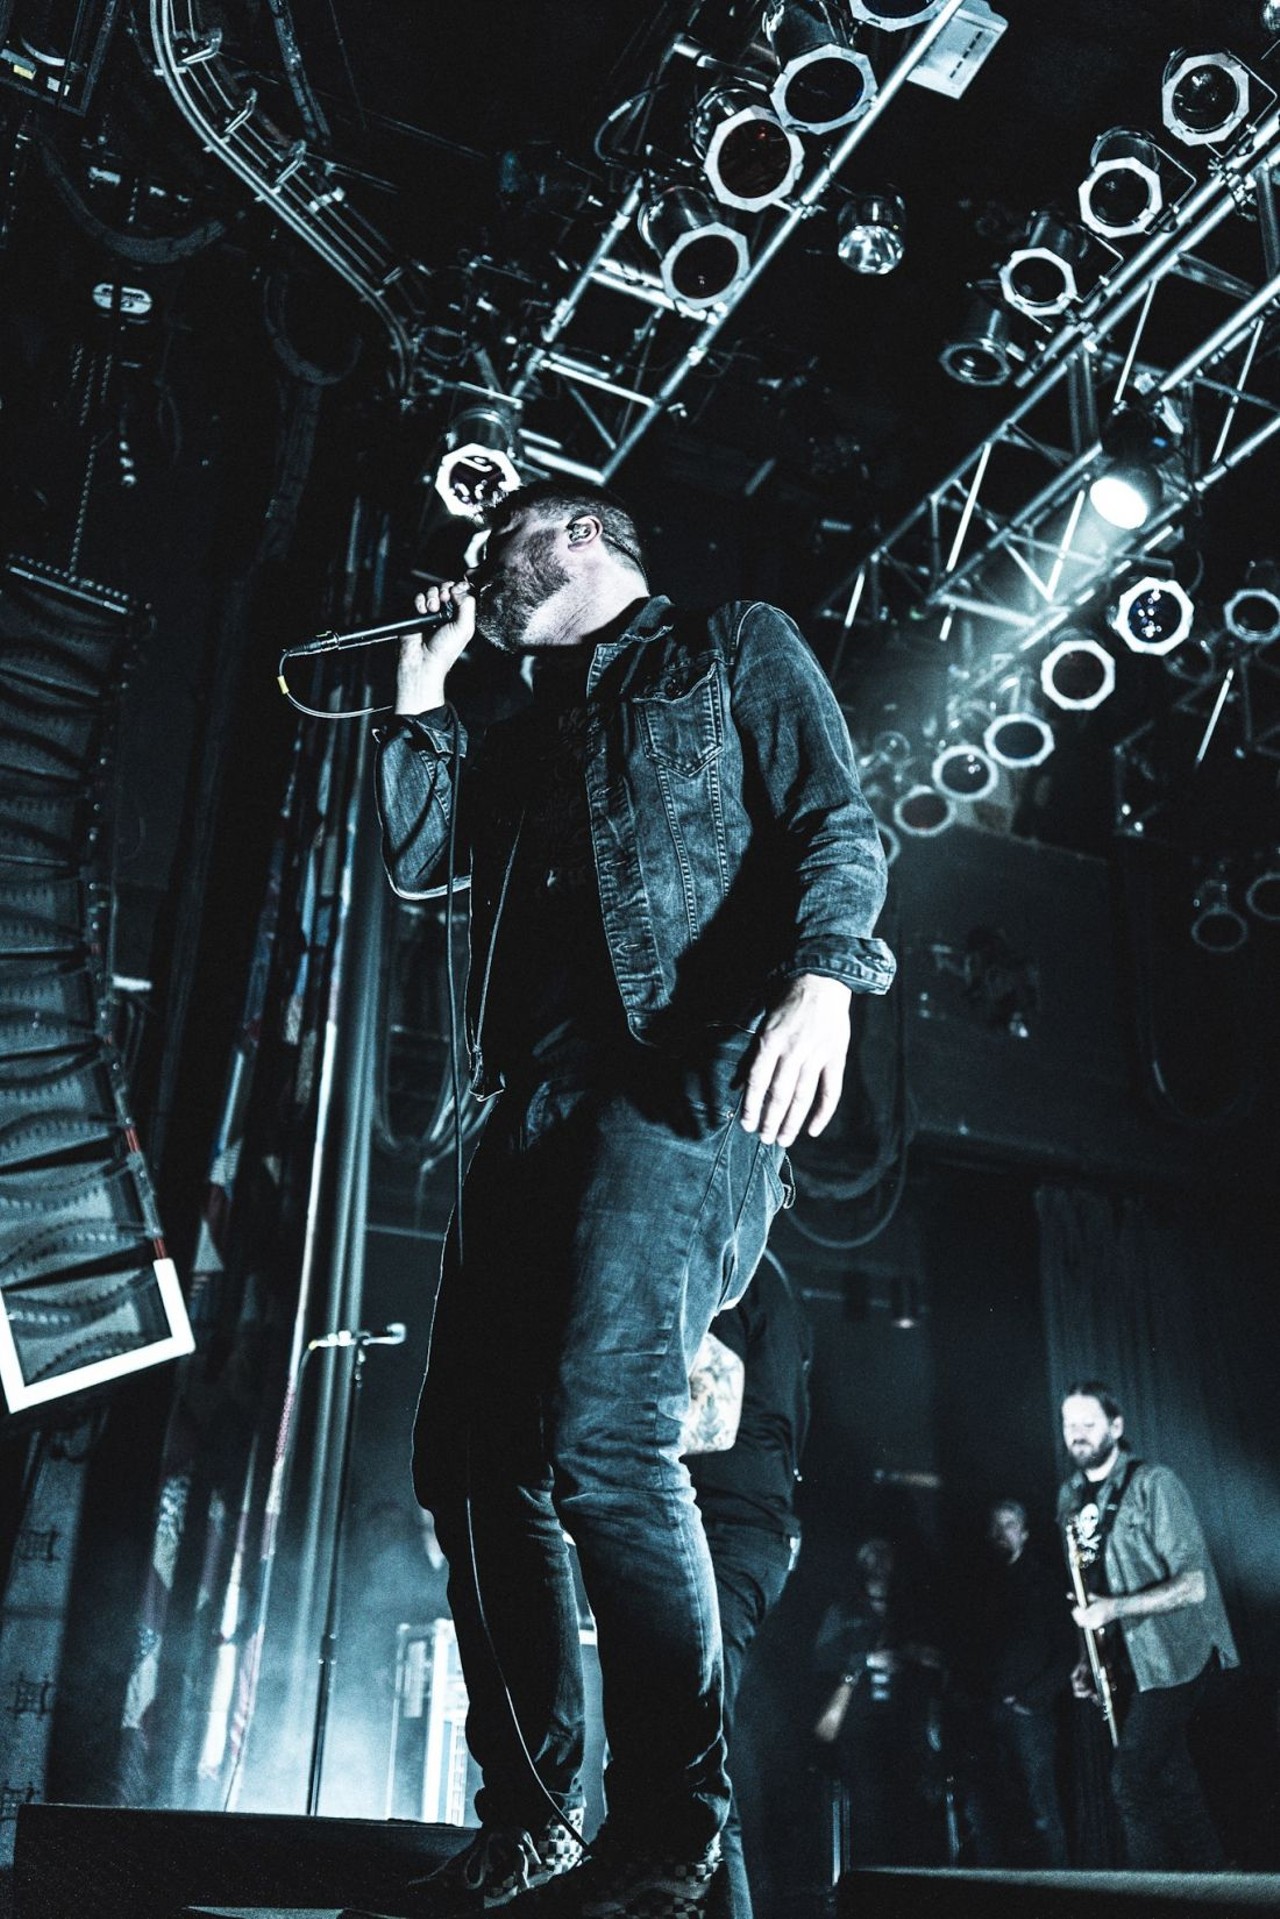 Silverstein and Hawthorne Heights Performing at House of Blues